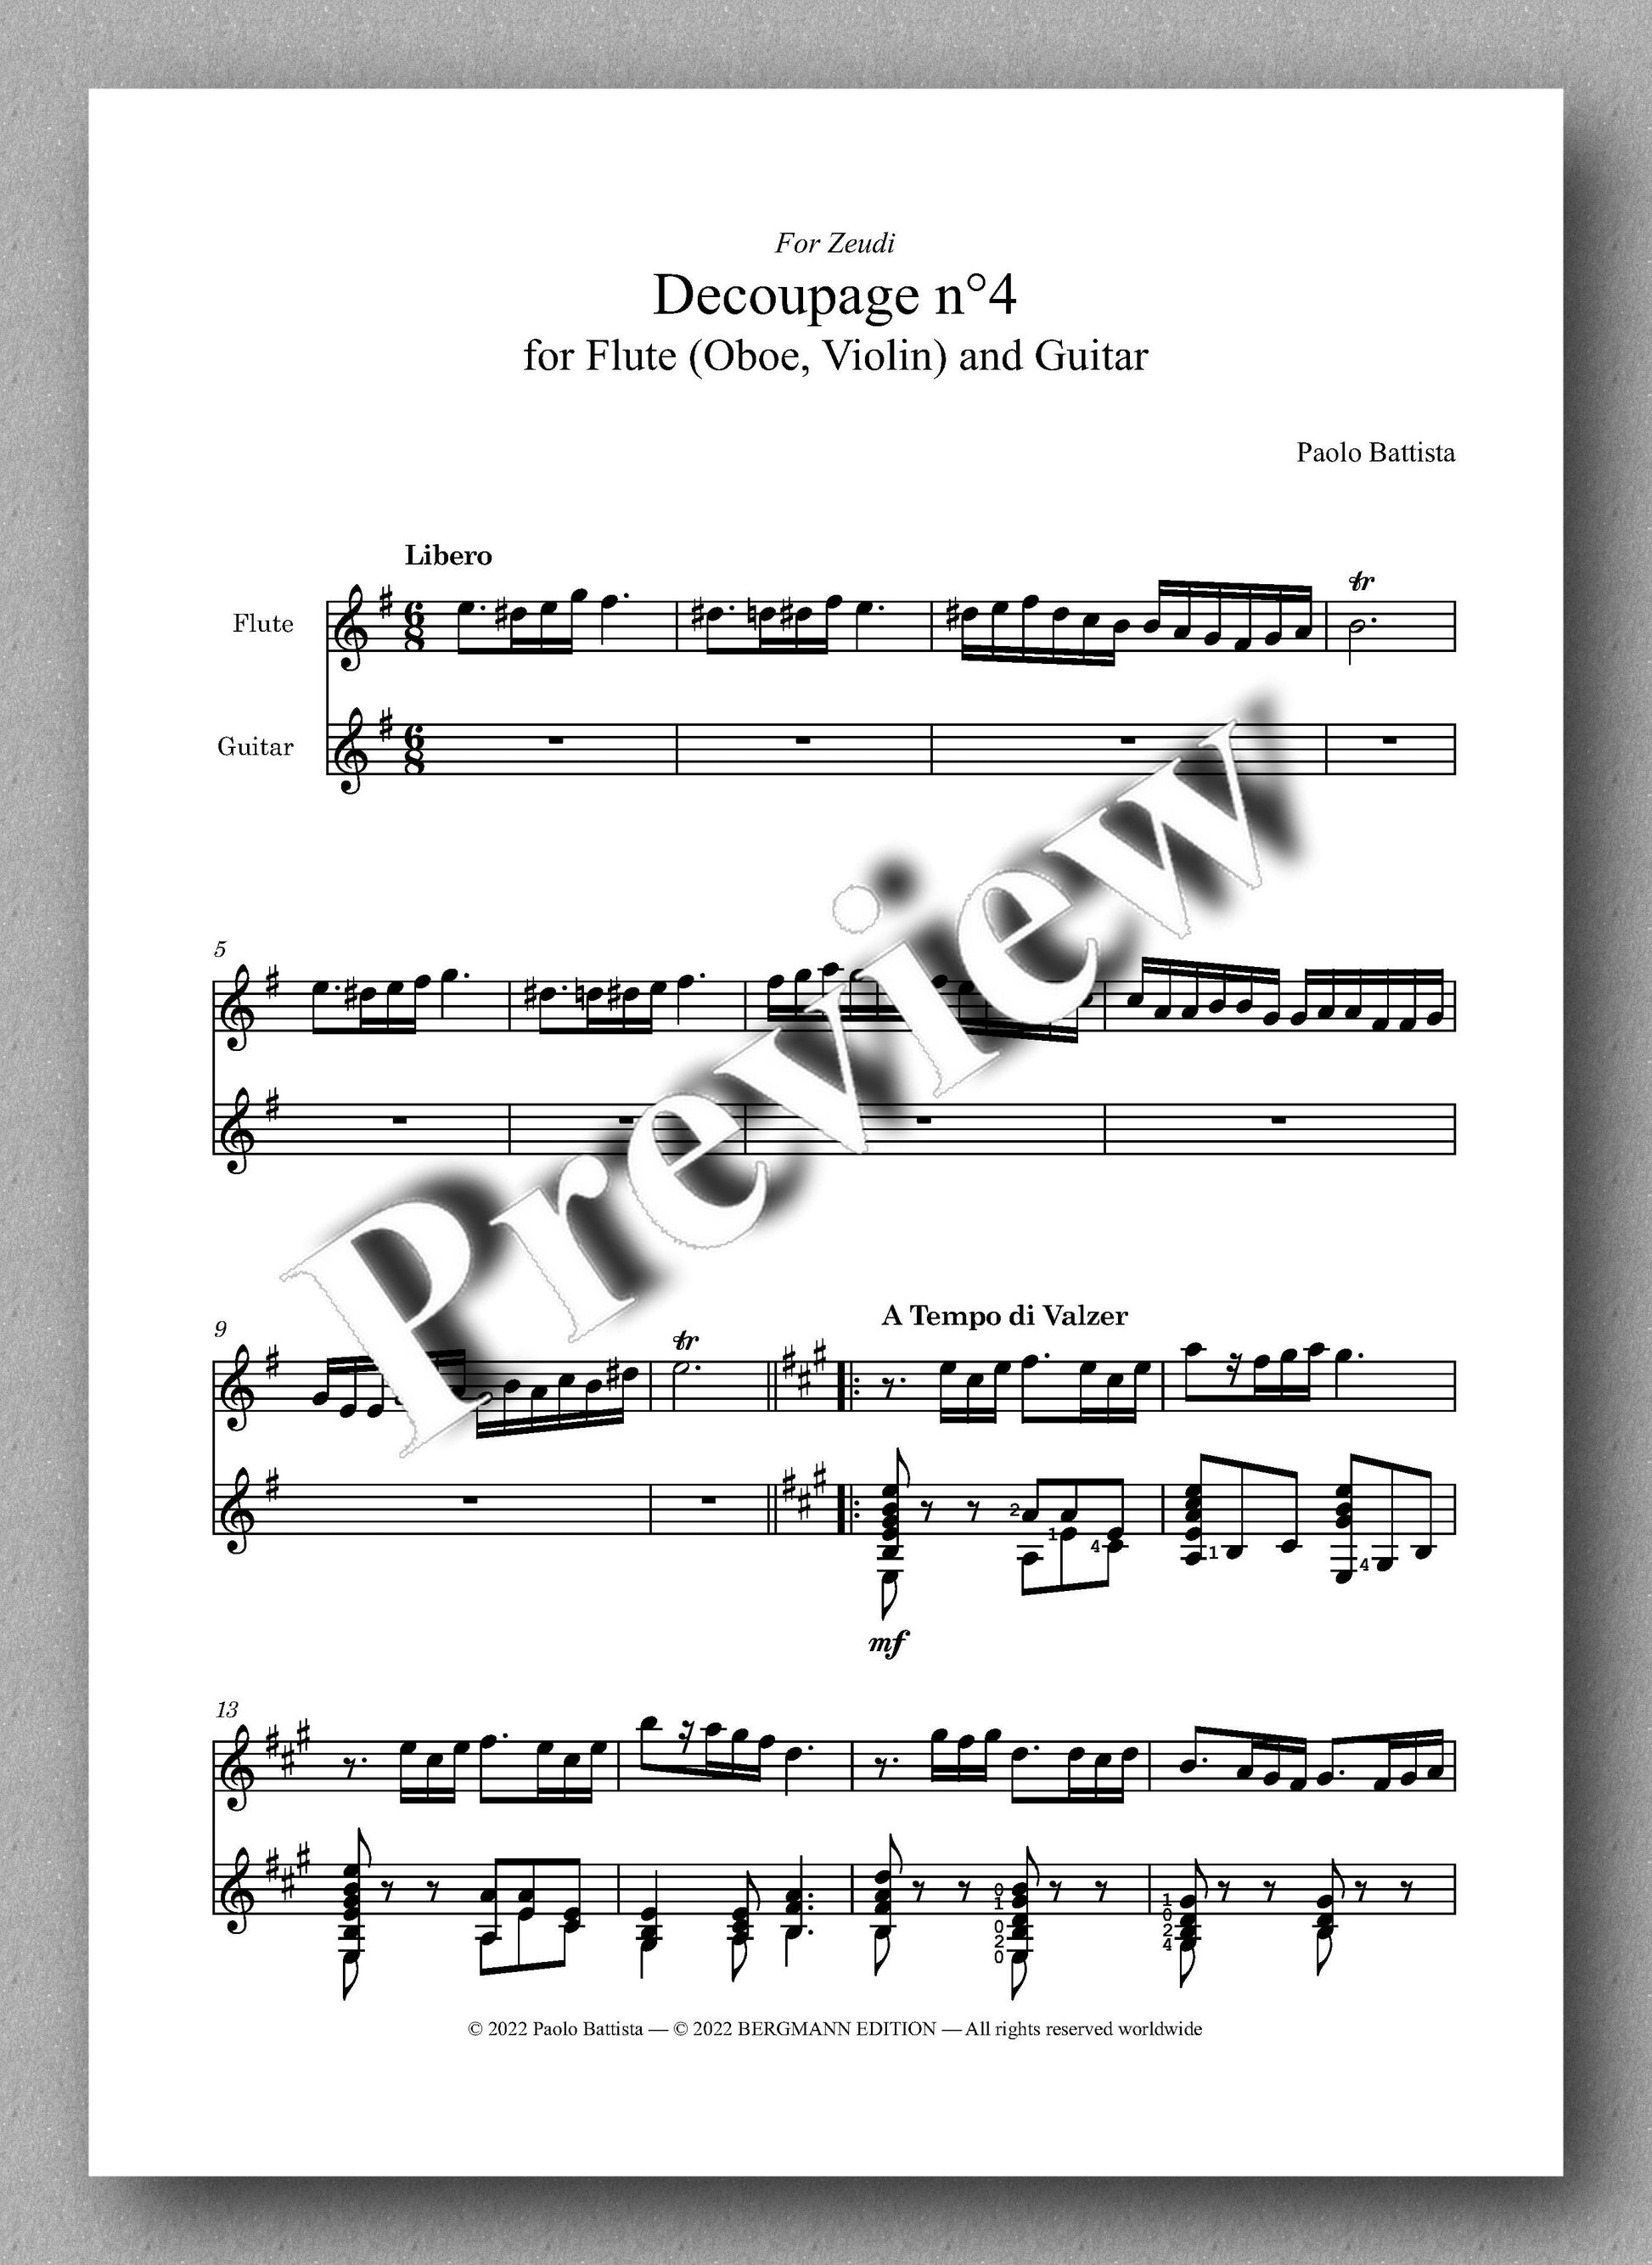 Decoupage n° 4 by Paolo Battista - preview of the music score